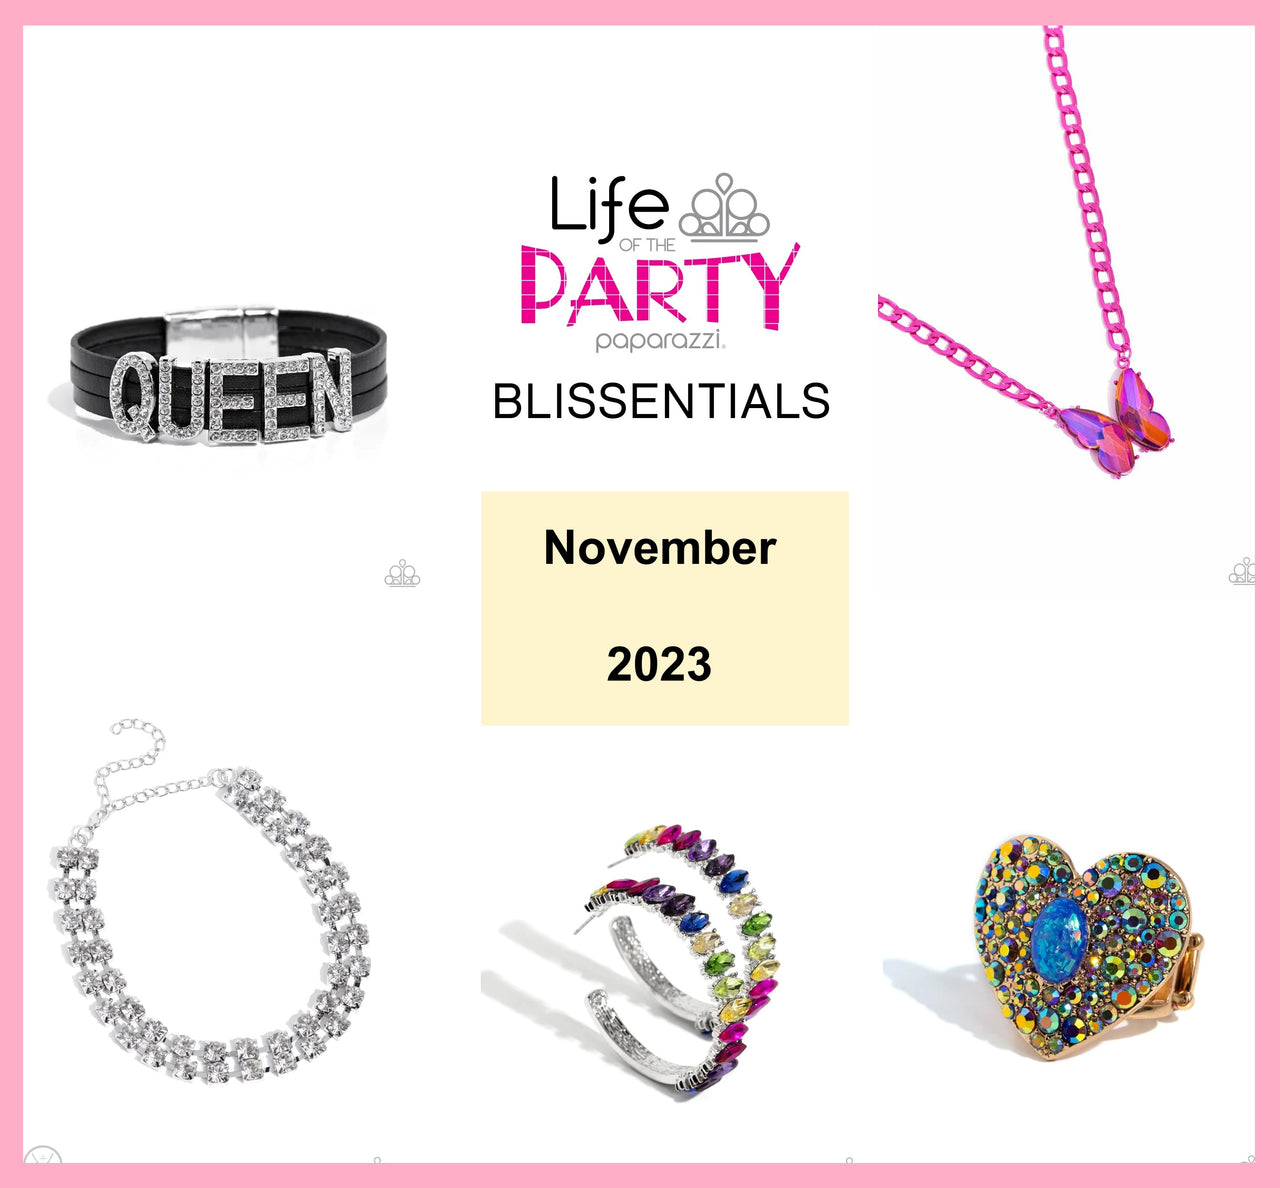 Life of the Party Blissentials November 2023